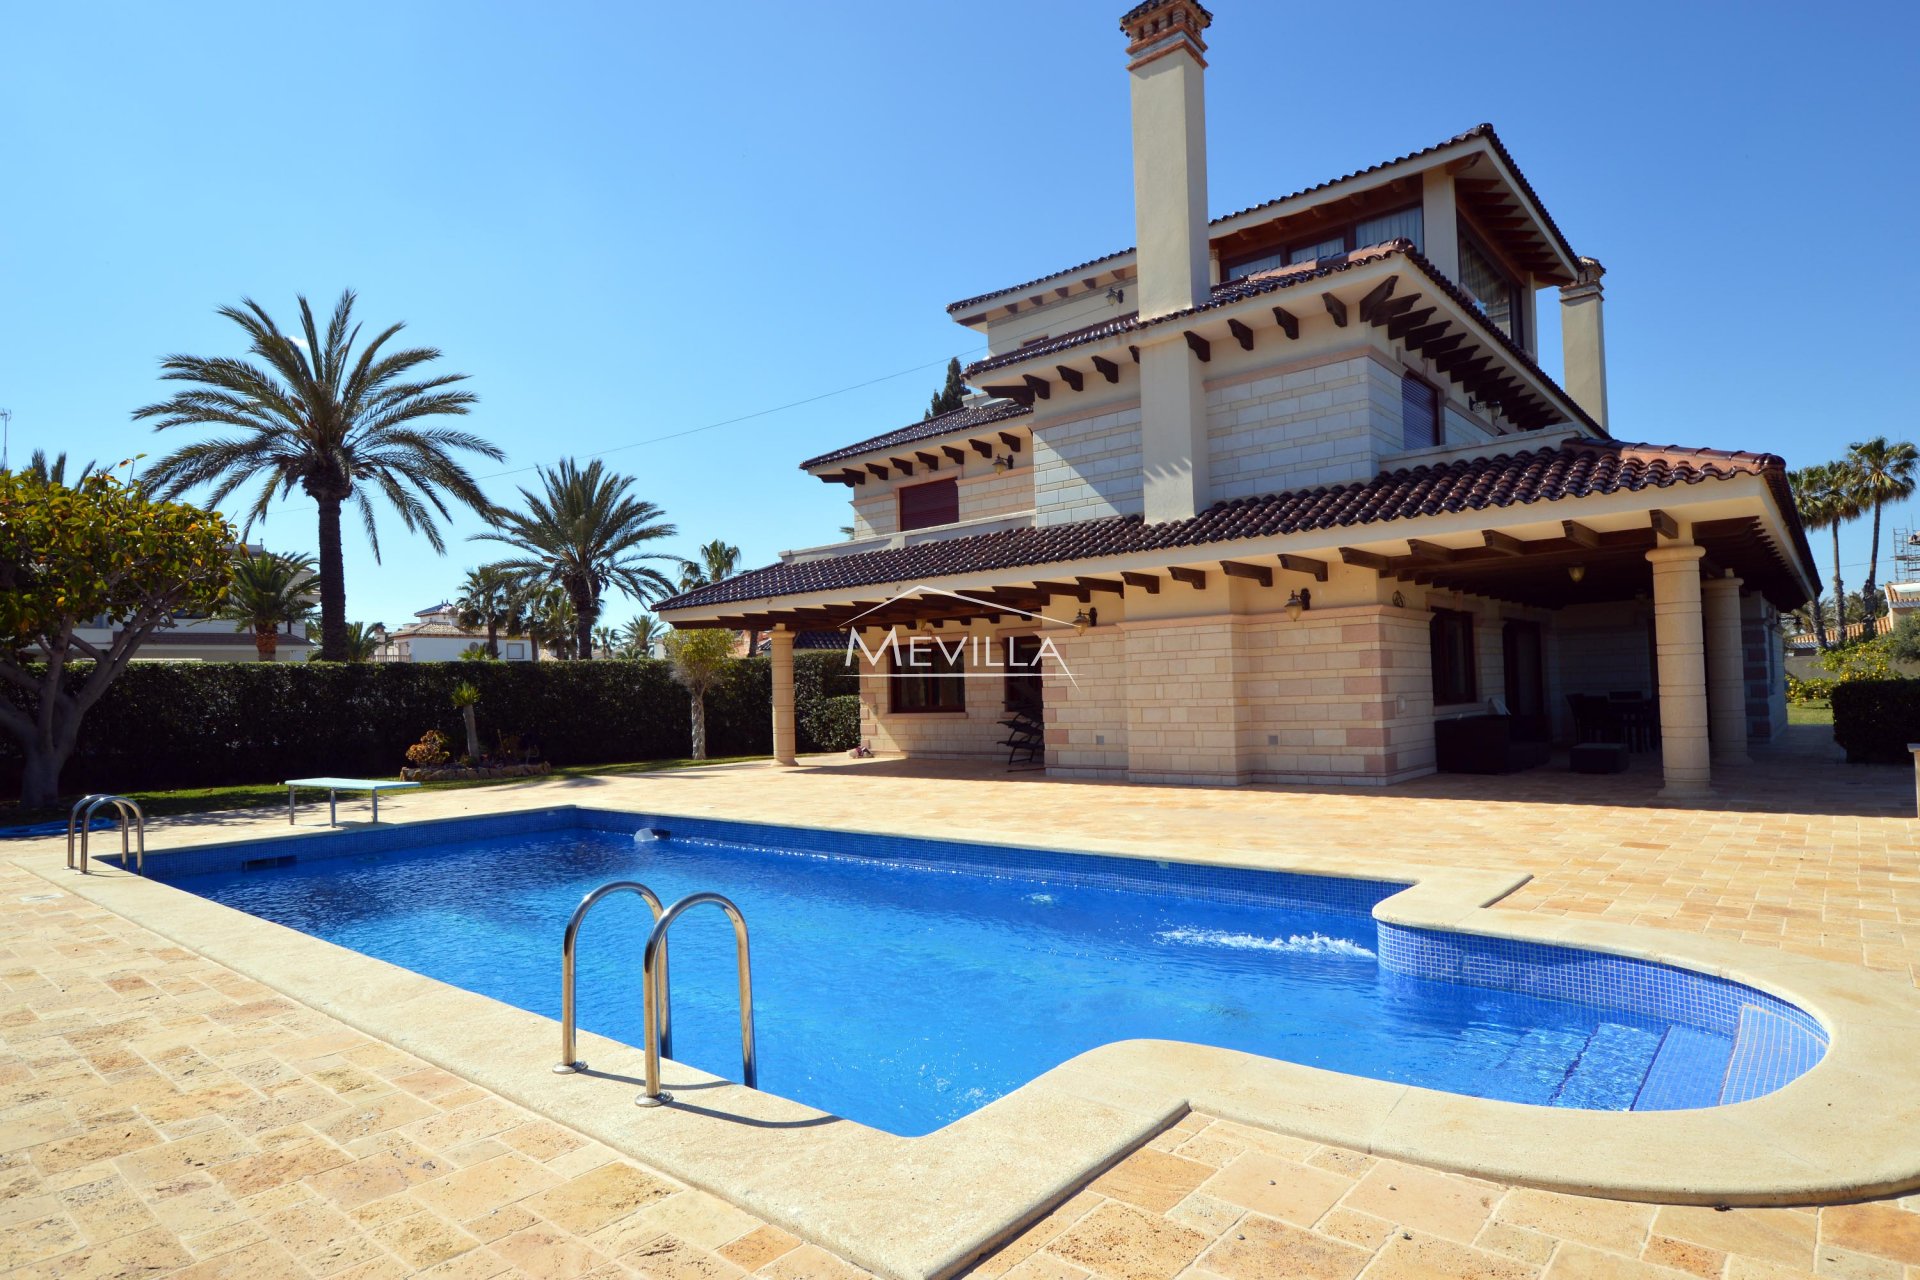 The villa with swimming pool 